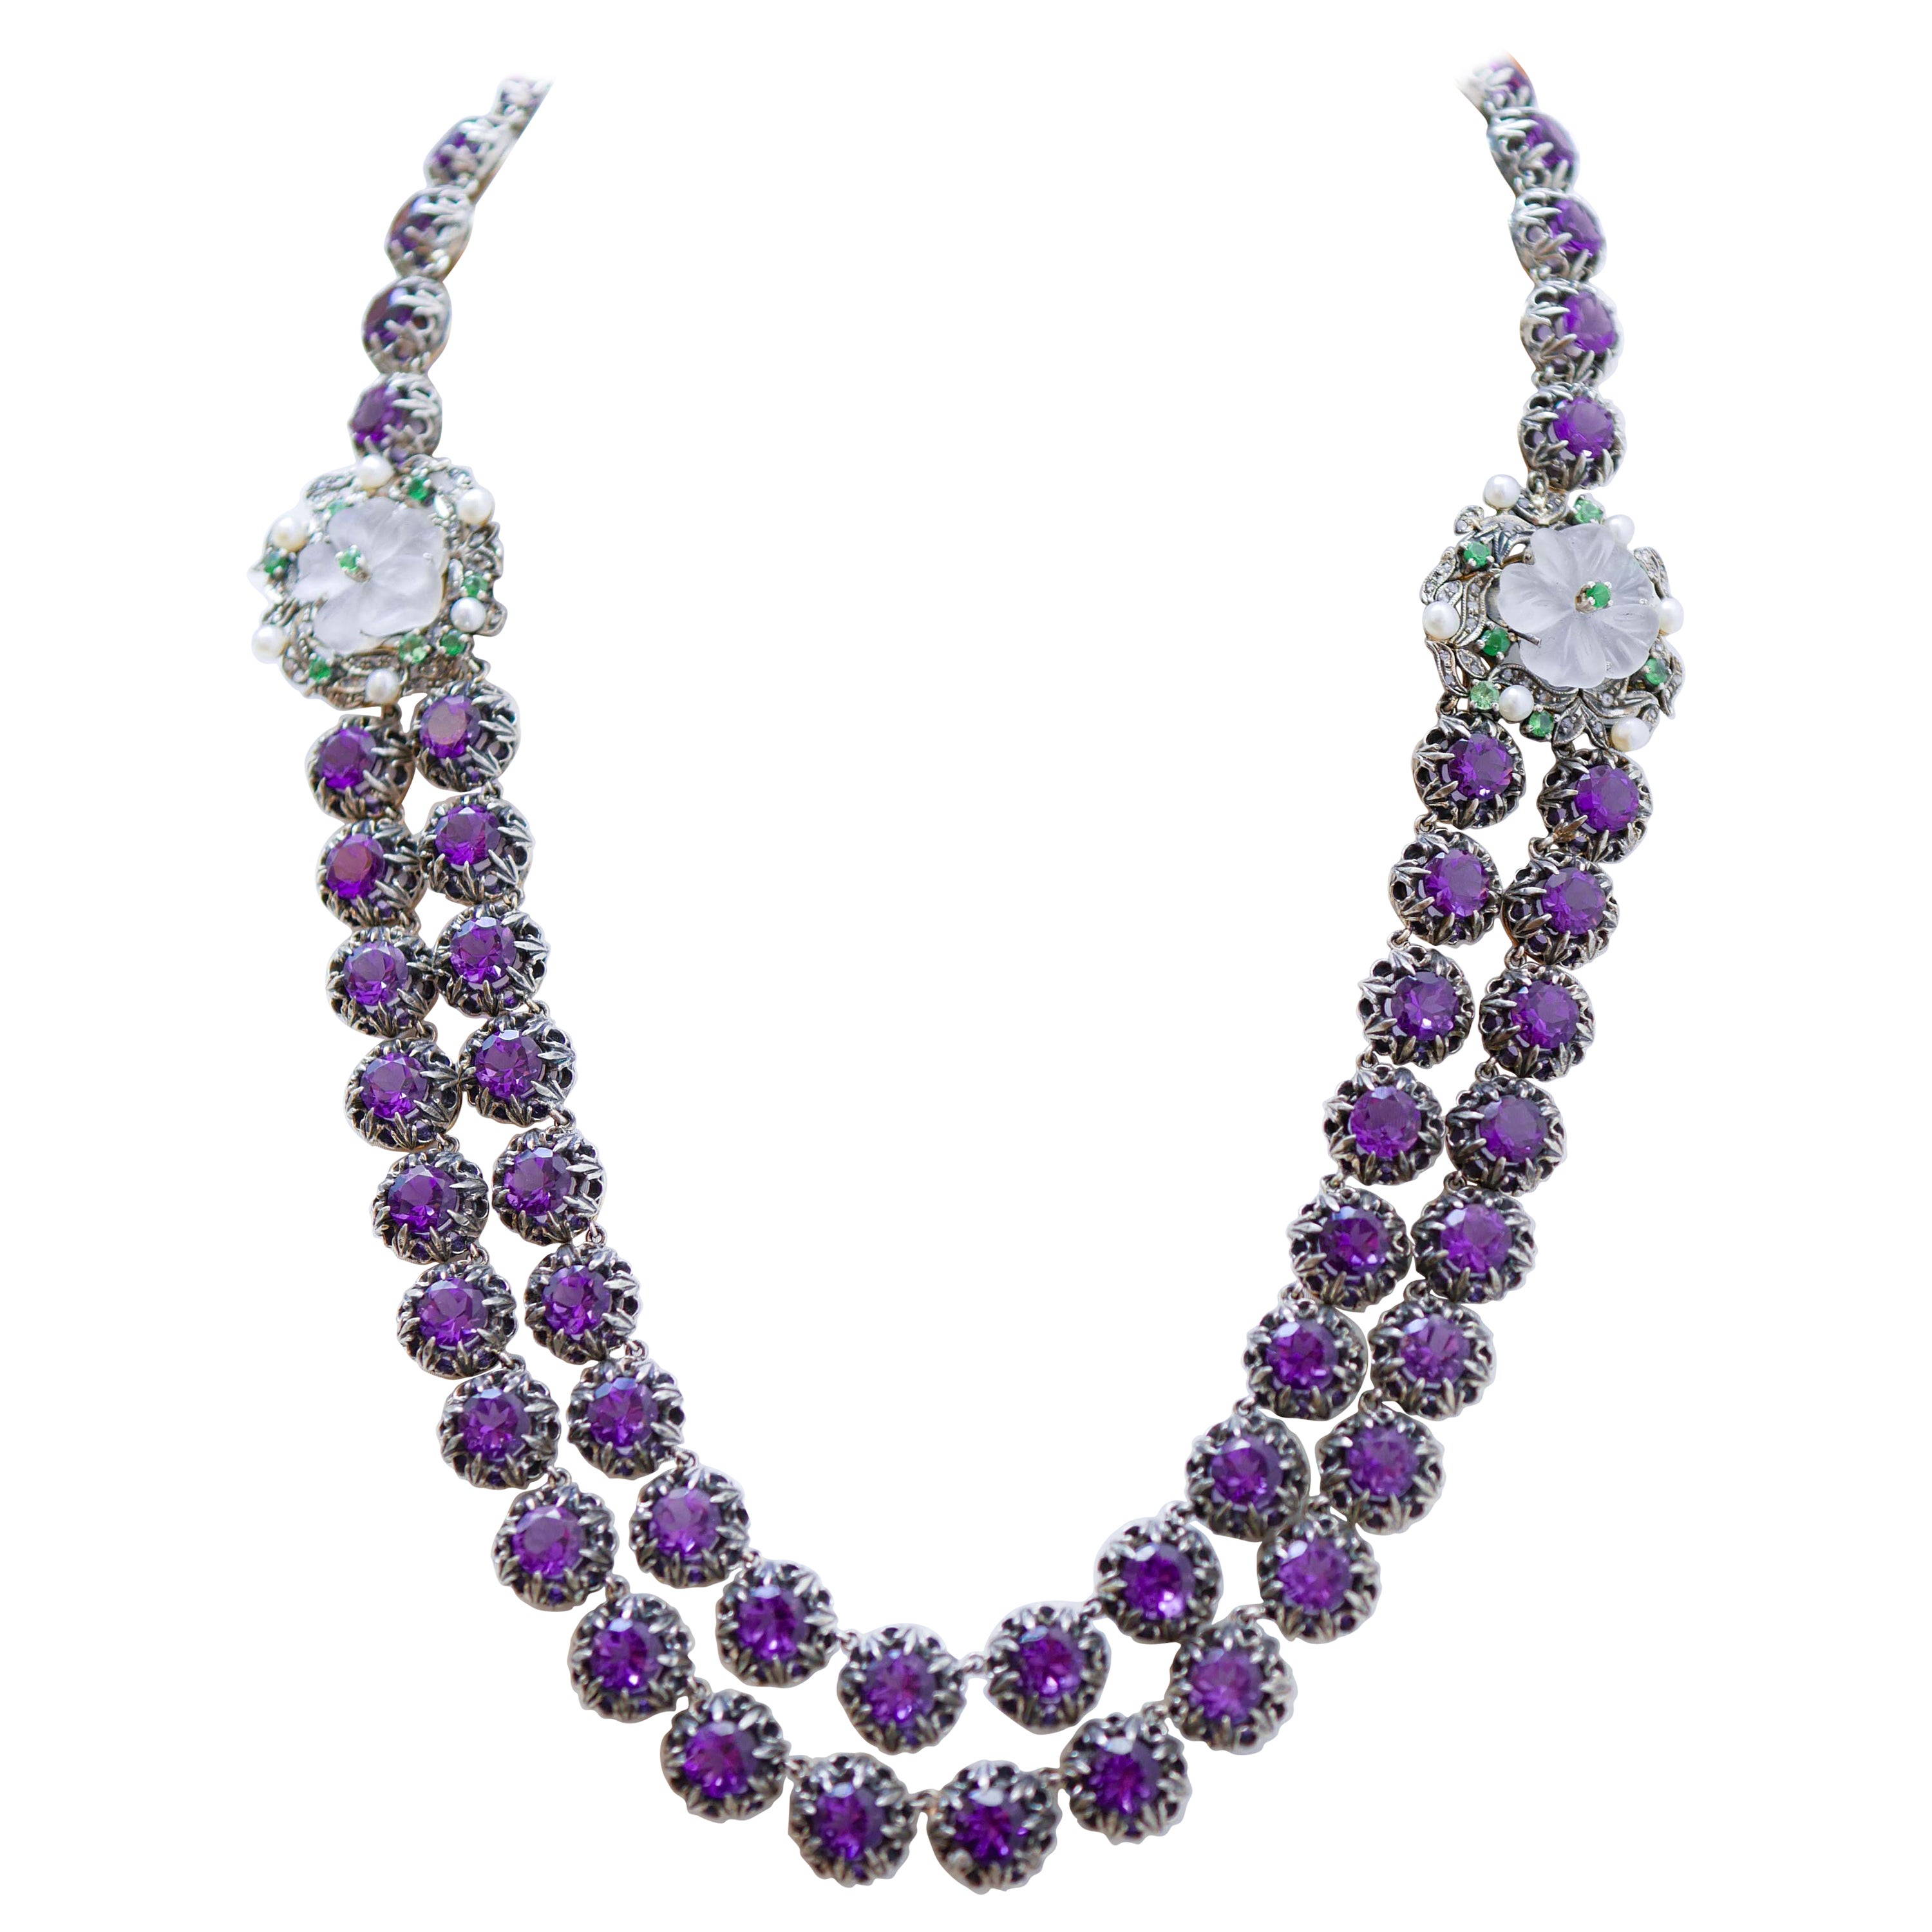 Amethysts, Tsavorite, Rock Crystal, Diamonds, Pearls, Gold and Silver Necklace. For Sale